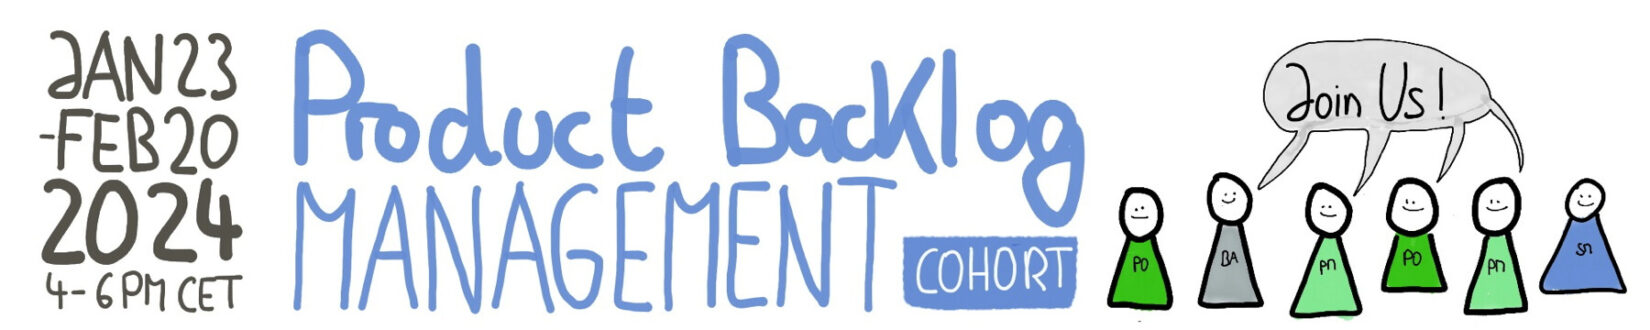 Product Backlog Management Cohort Class of Jan 23 to Feb 20, 2024 — Berlin-Product-People.com